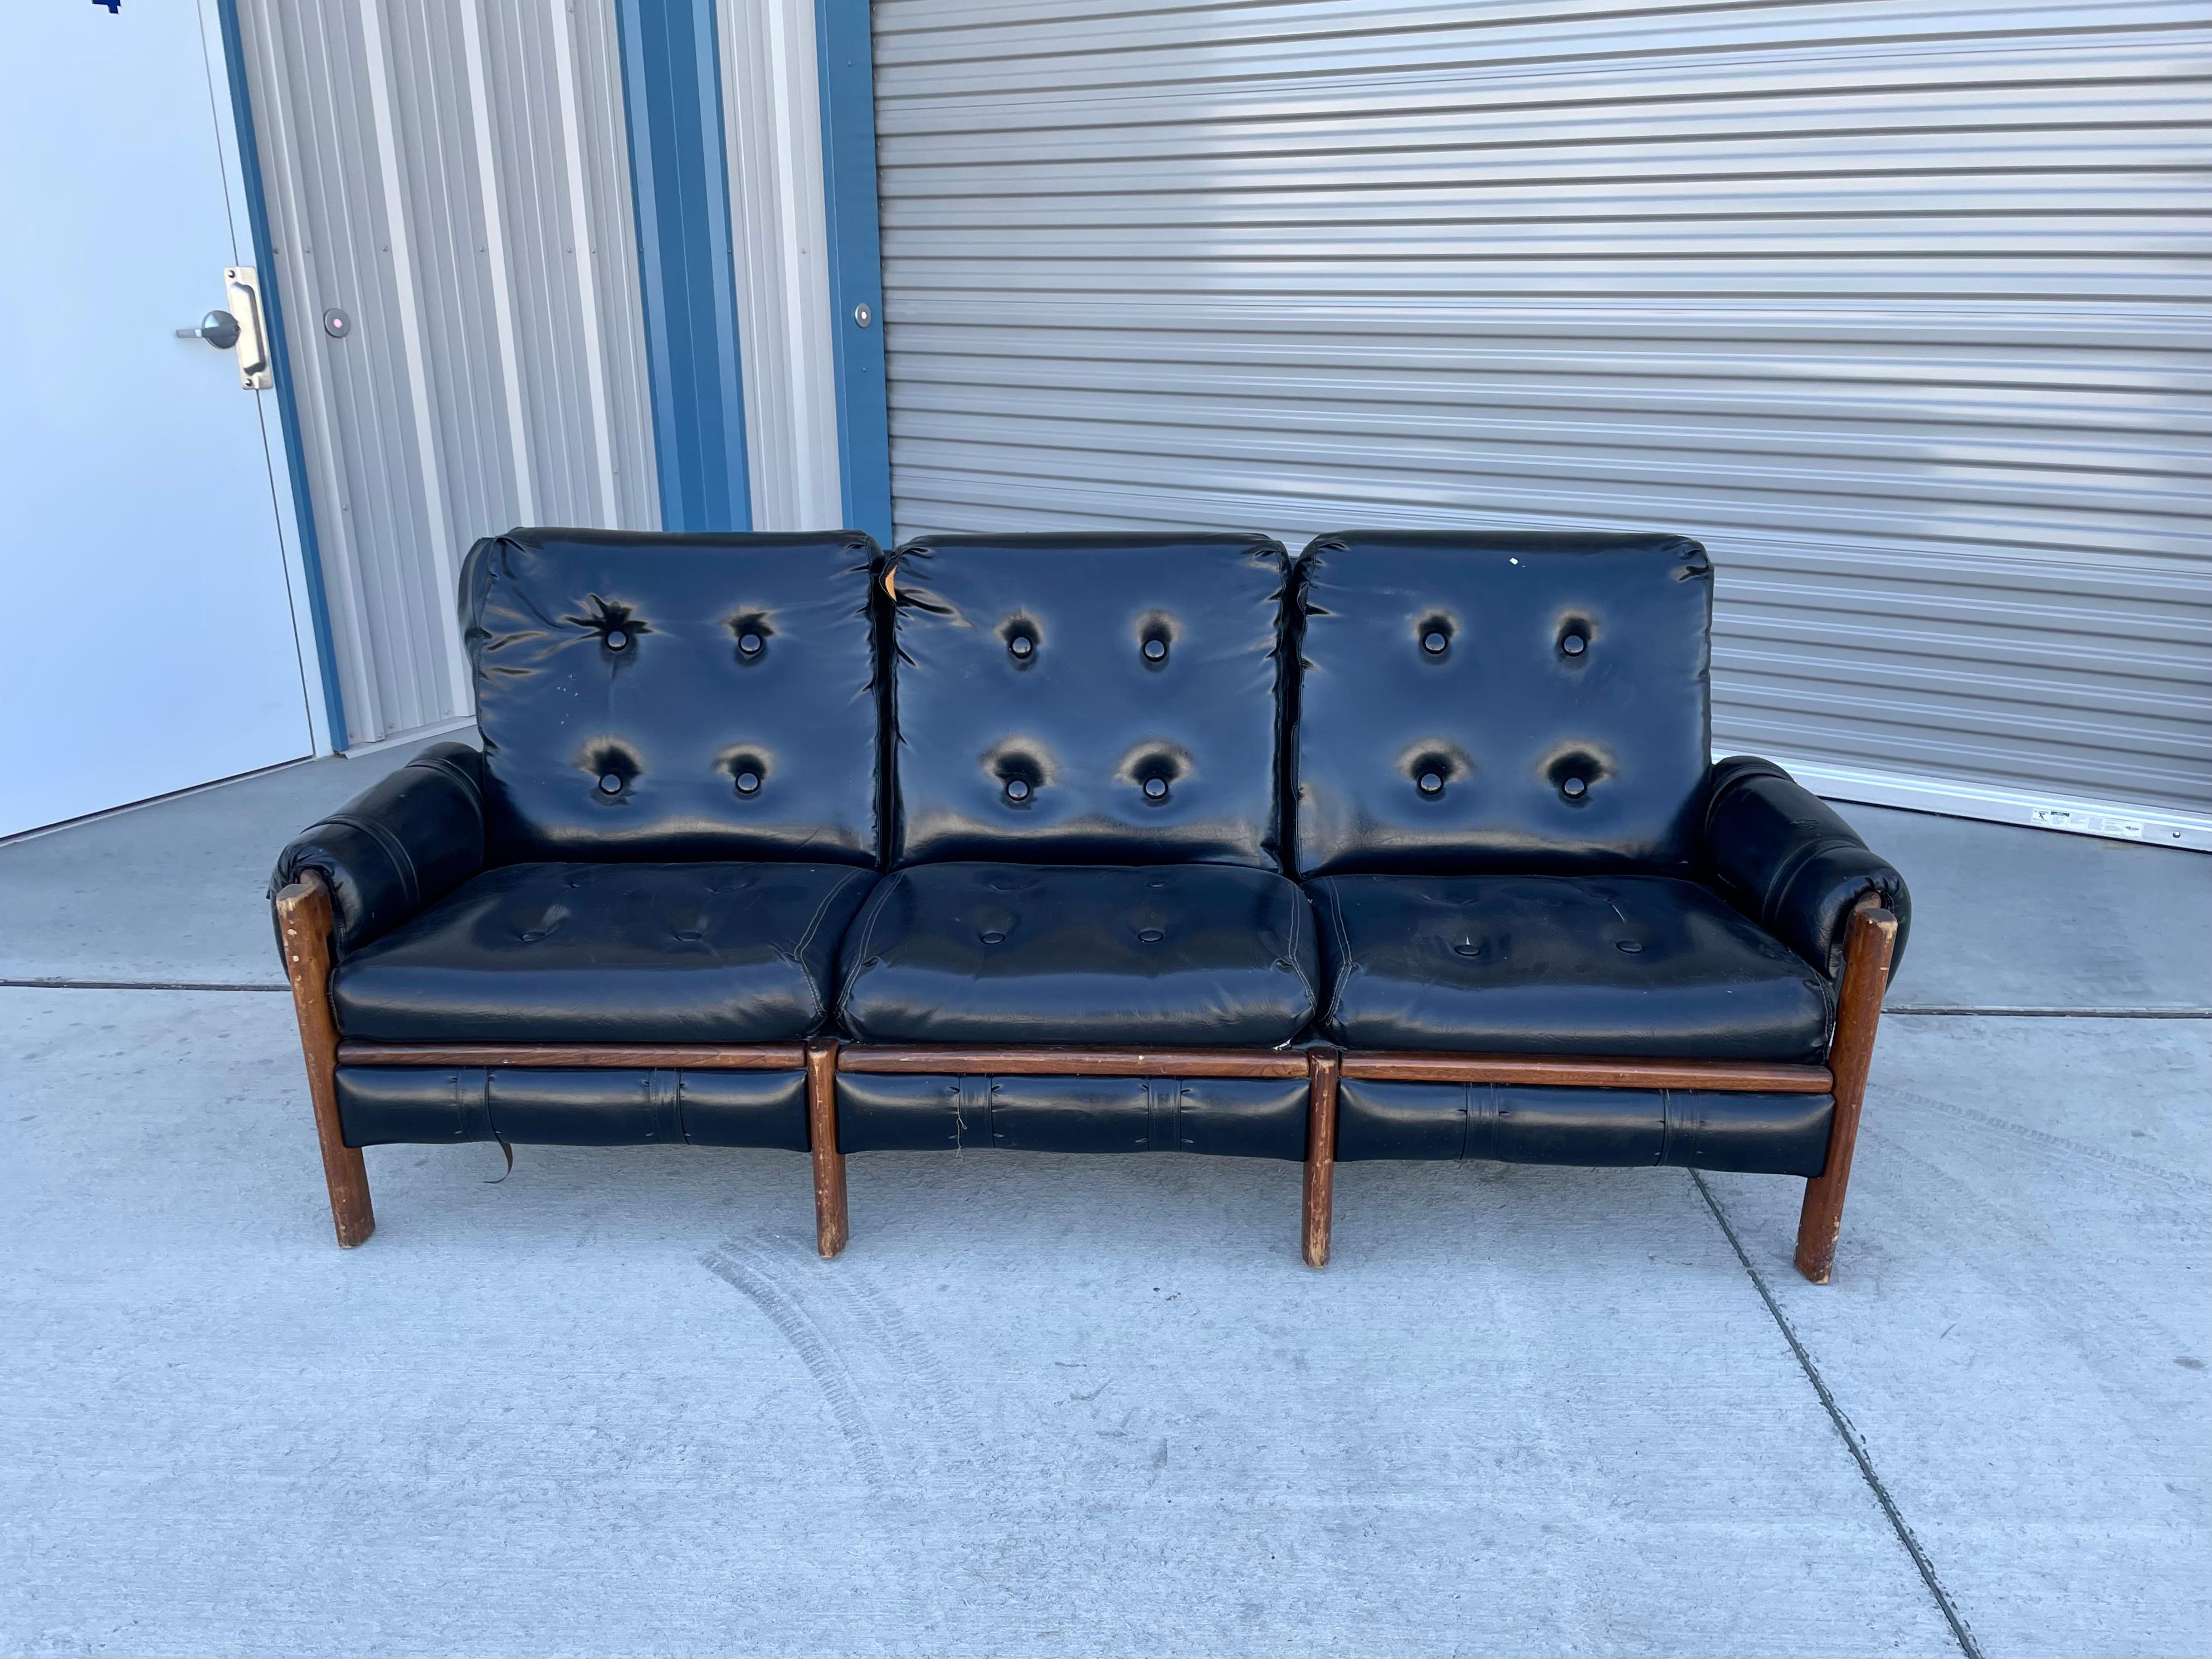 Mid-century leather safari sofa designed and manufactured in the United States 1950s. This stunning sofa features a black leather upholstery that sits on a walnut frame guaranteed to draw attention in any room and is just amazing to relax in.